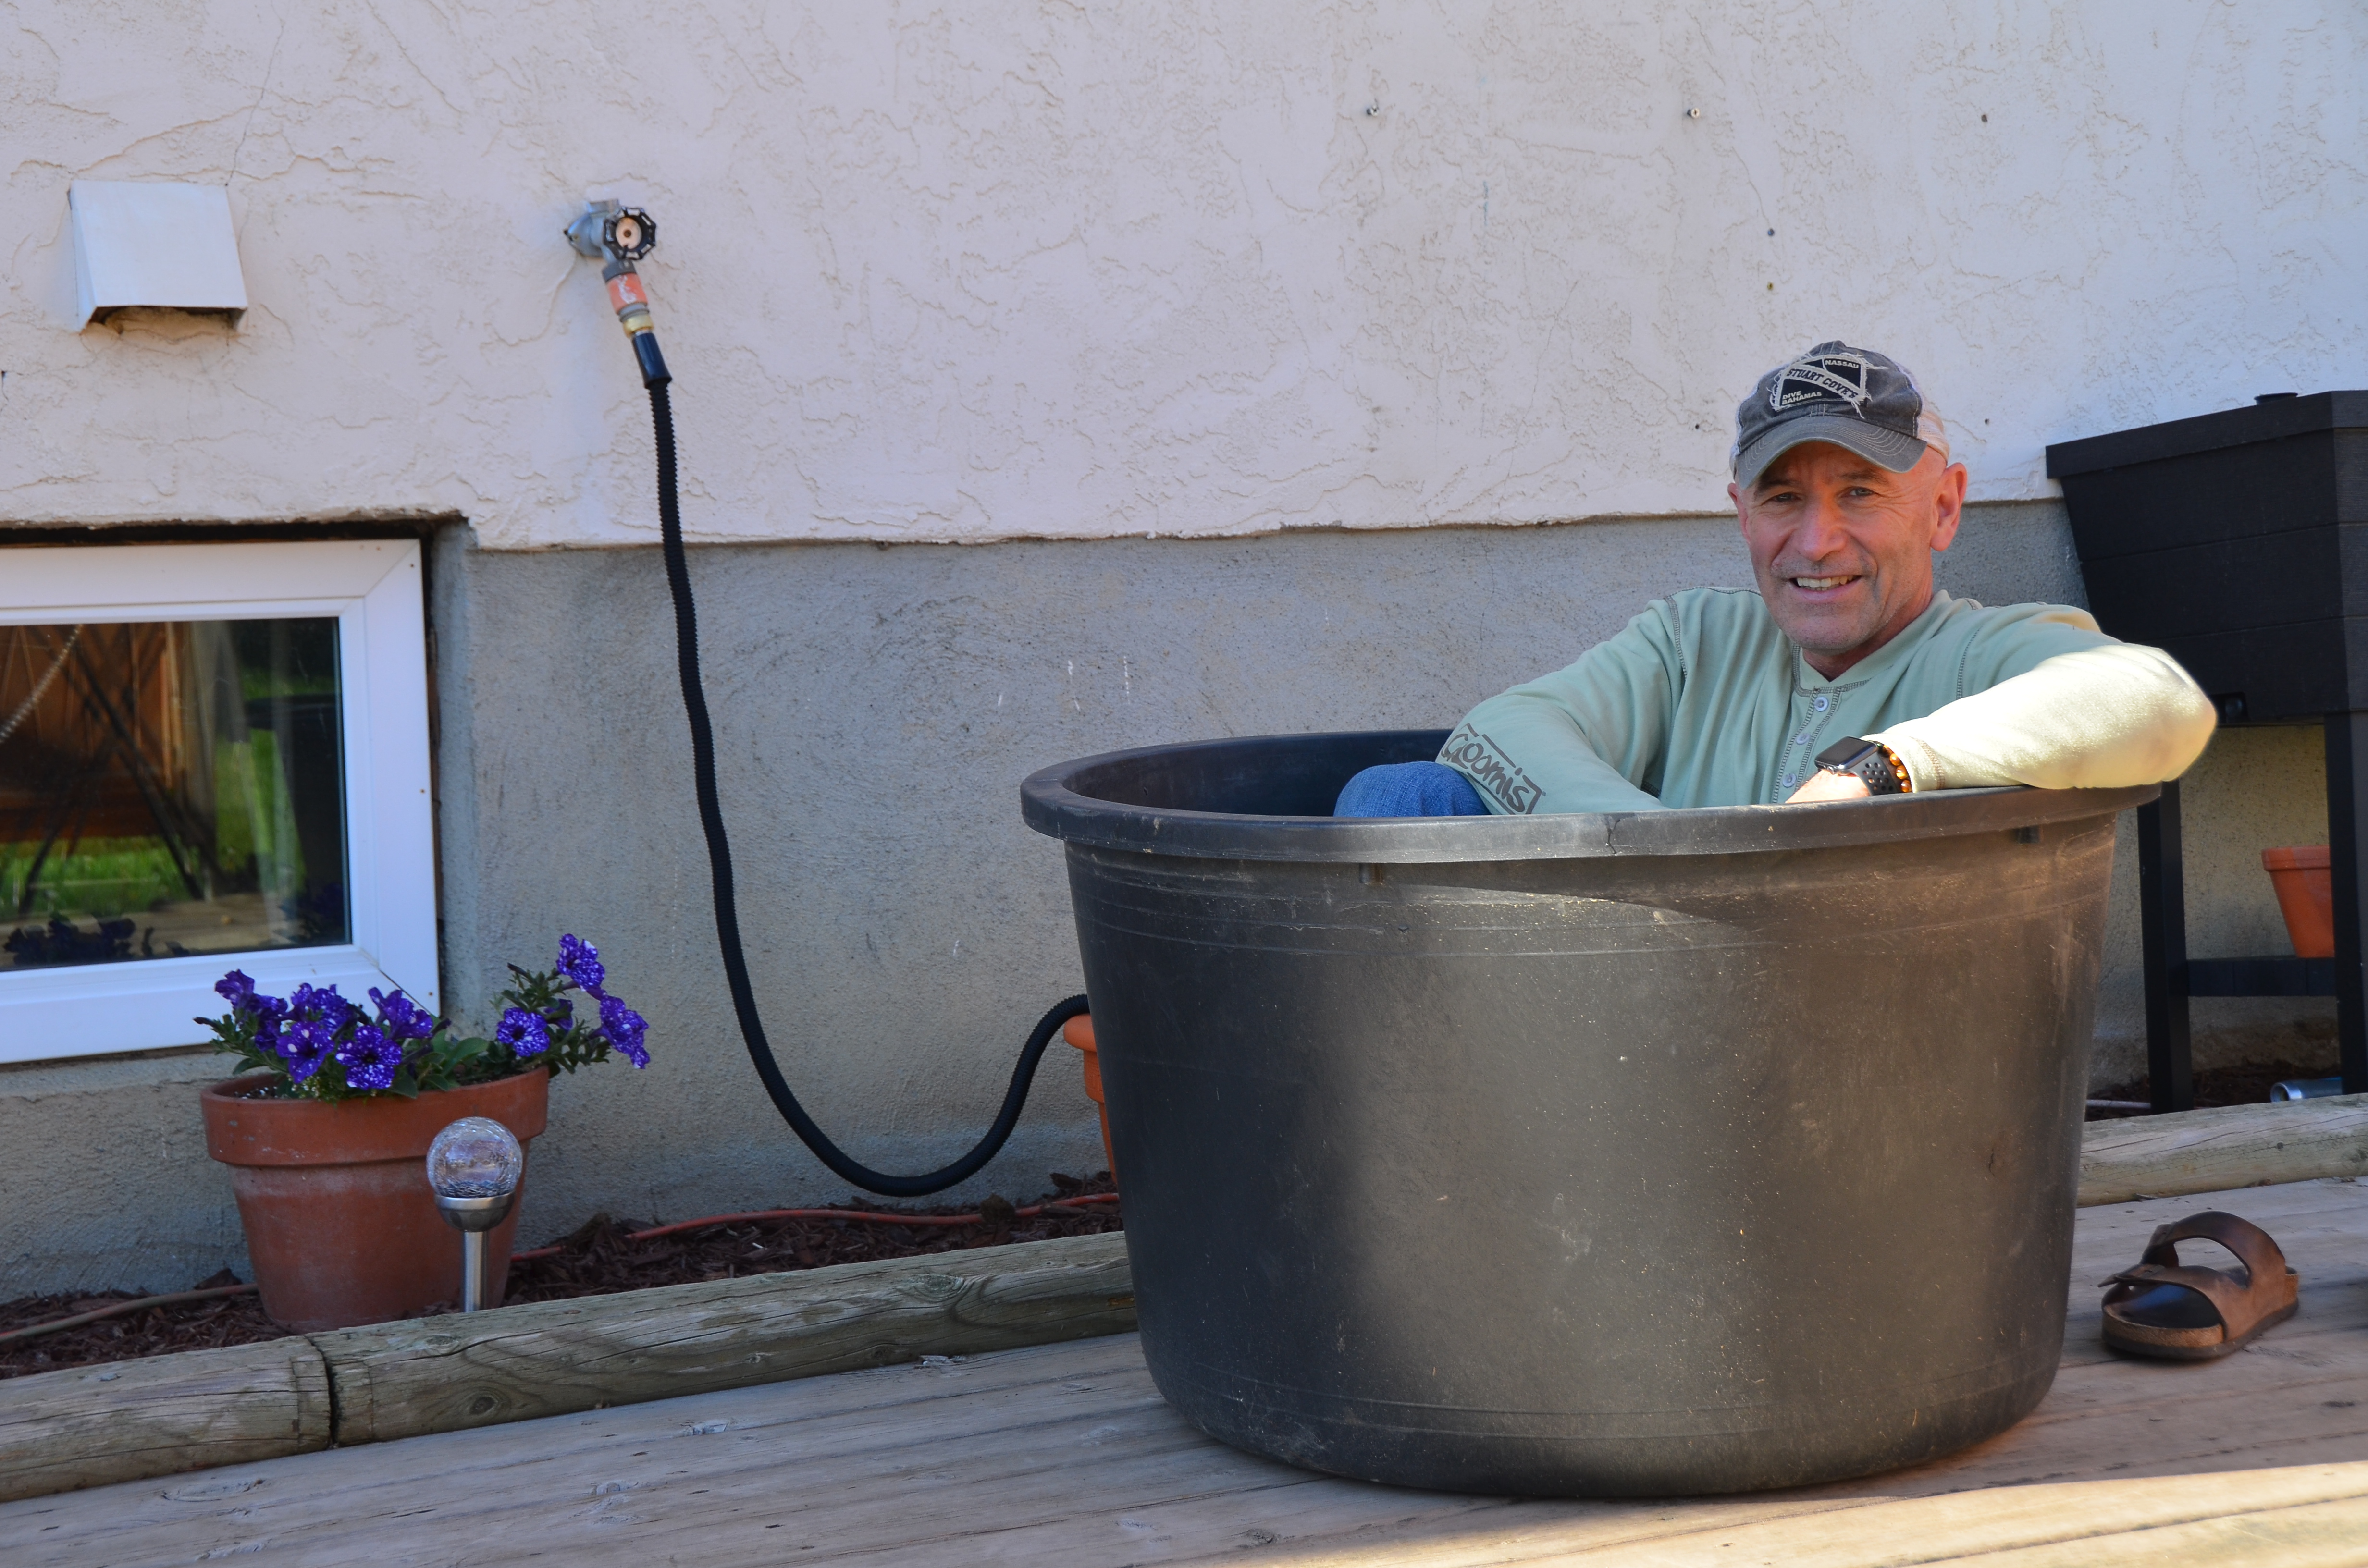 My good natured husband sitting in the rubber tub to showcase how we plan to use it as a portable hot tub.